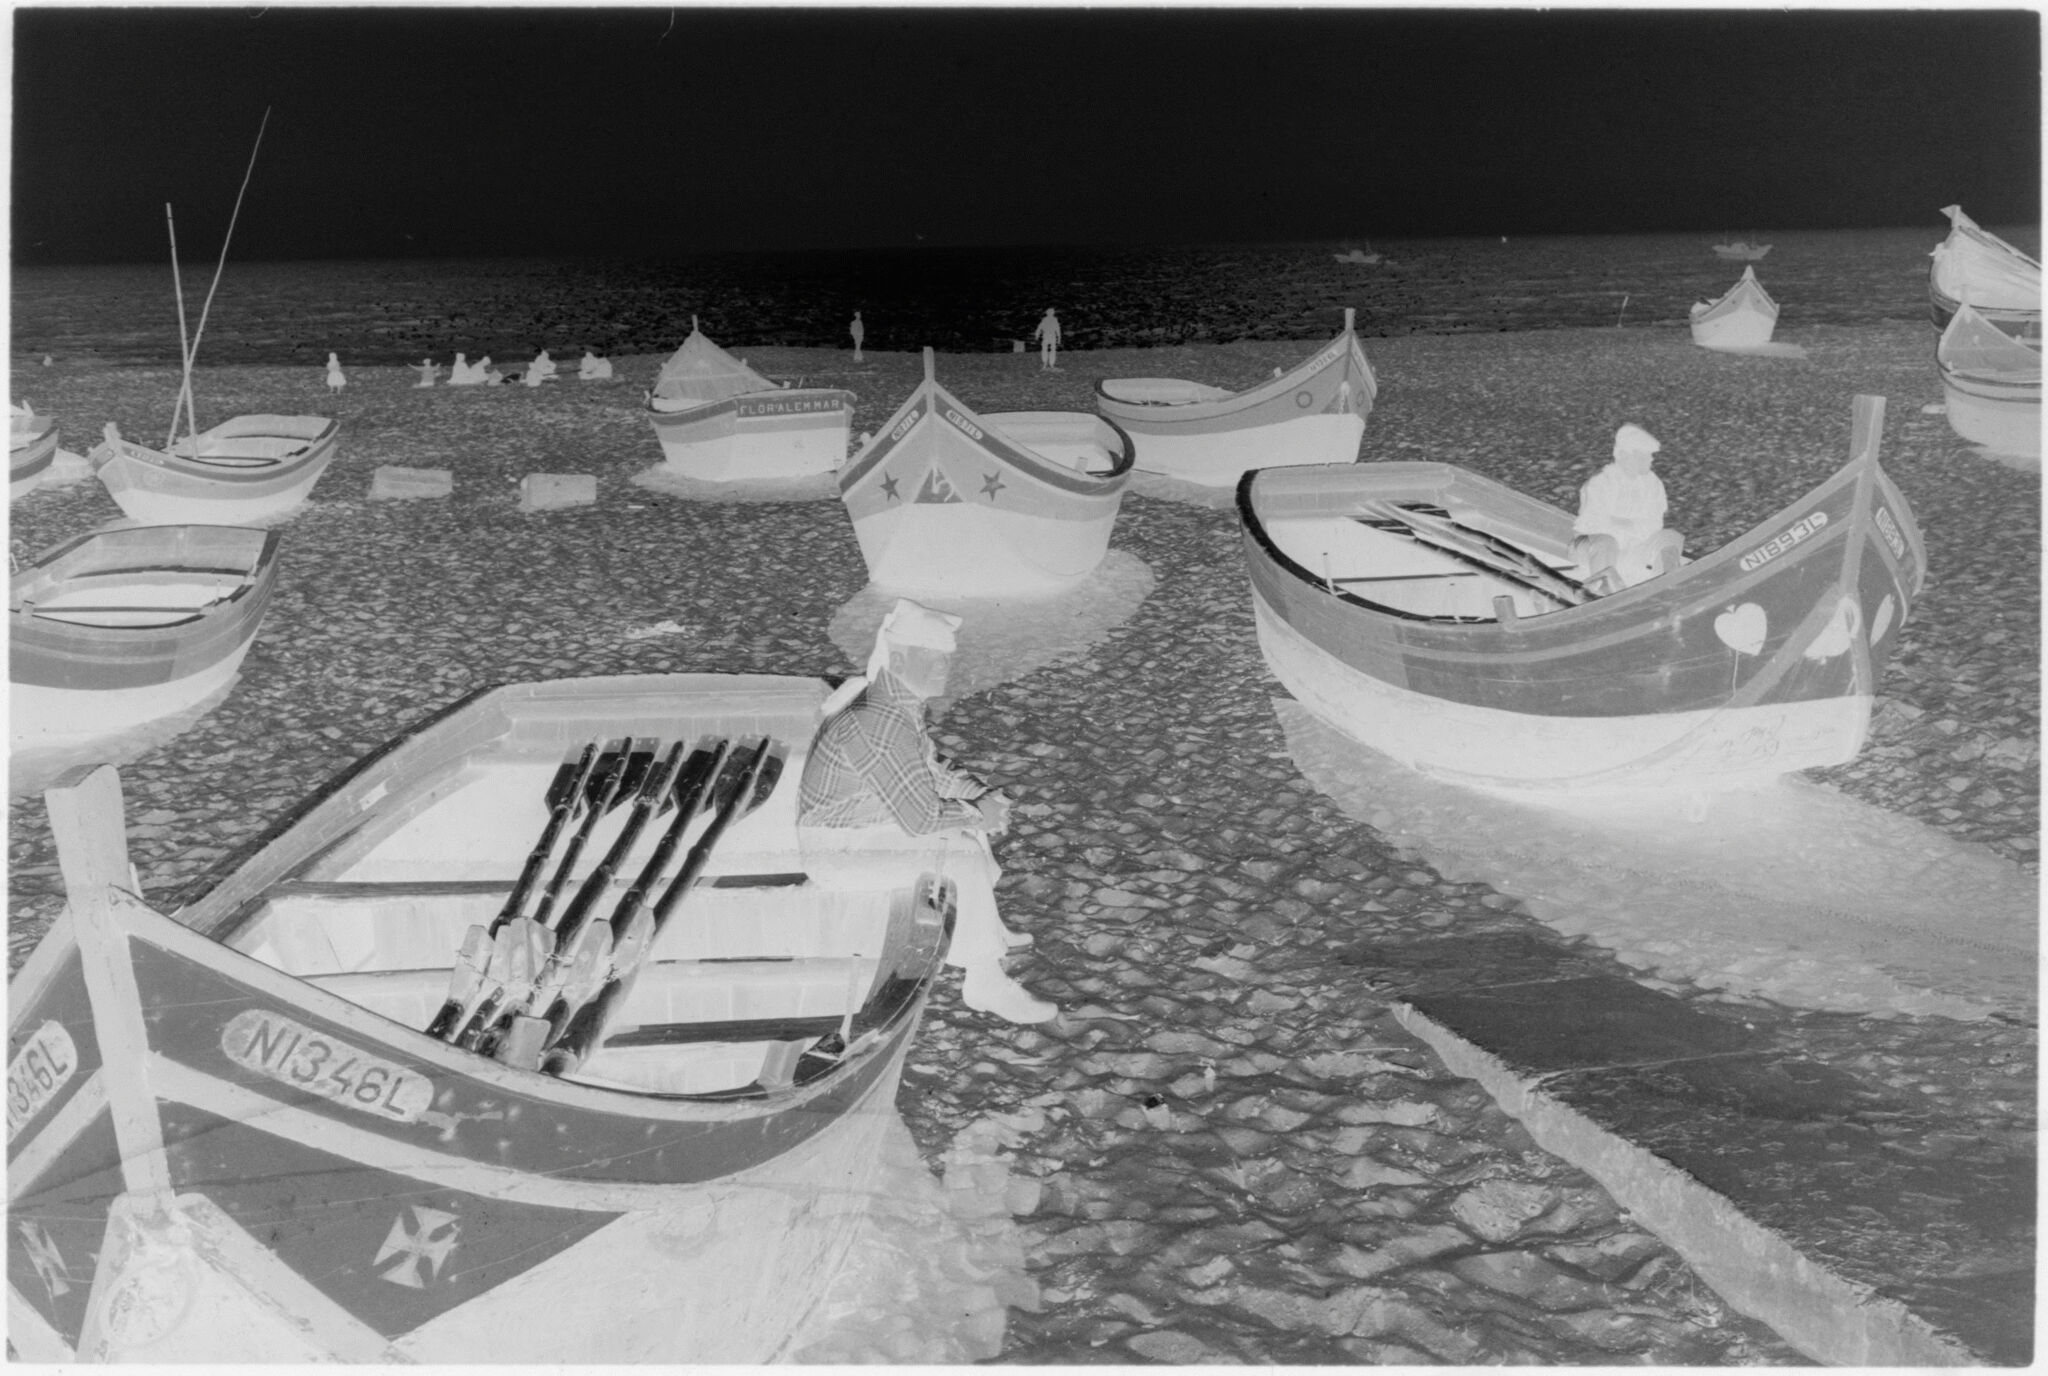 Untitled (Fishing Boats On Beach, Nazaré, Portugal)